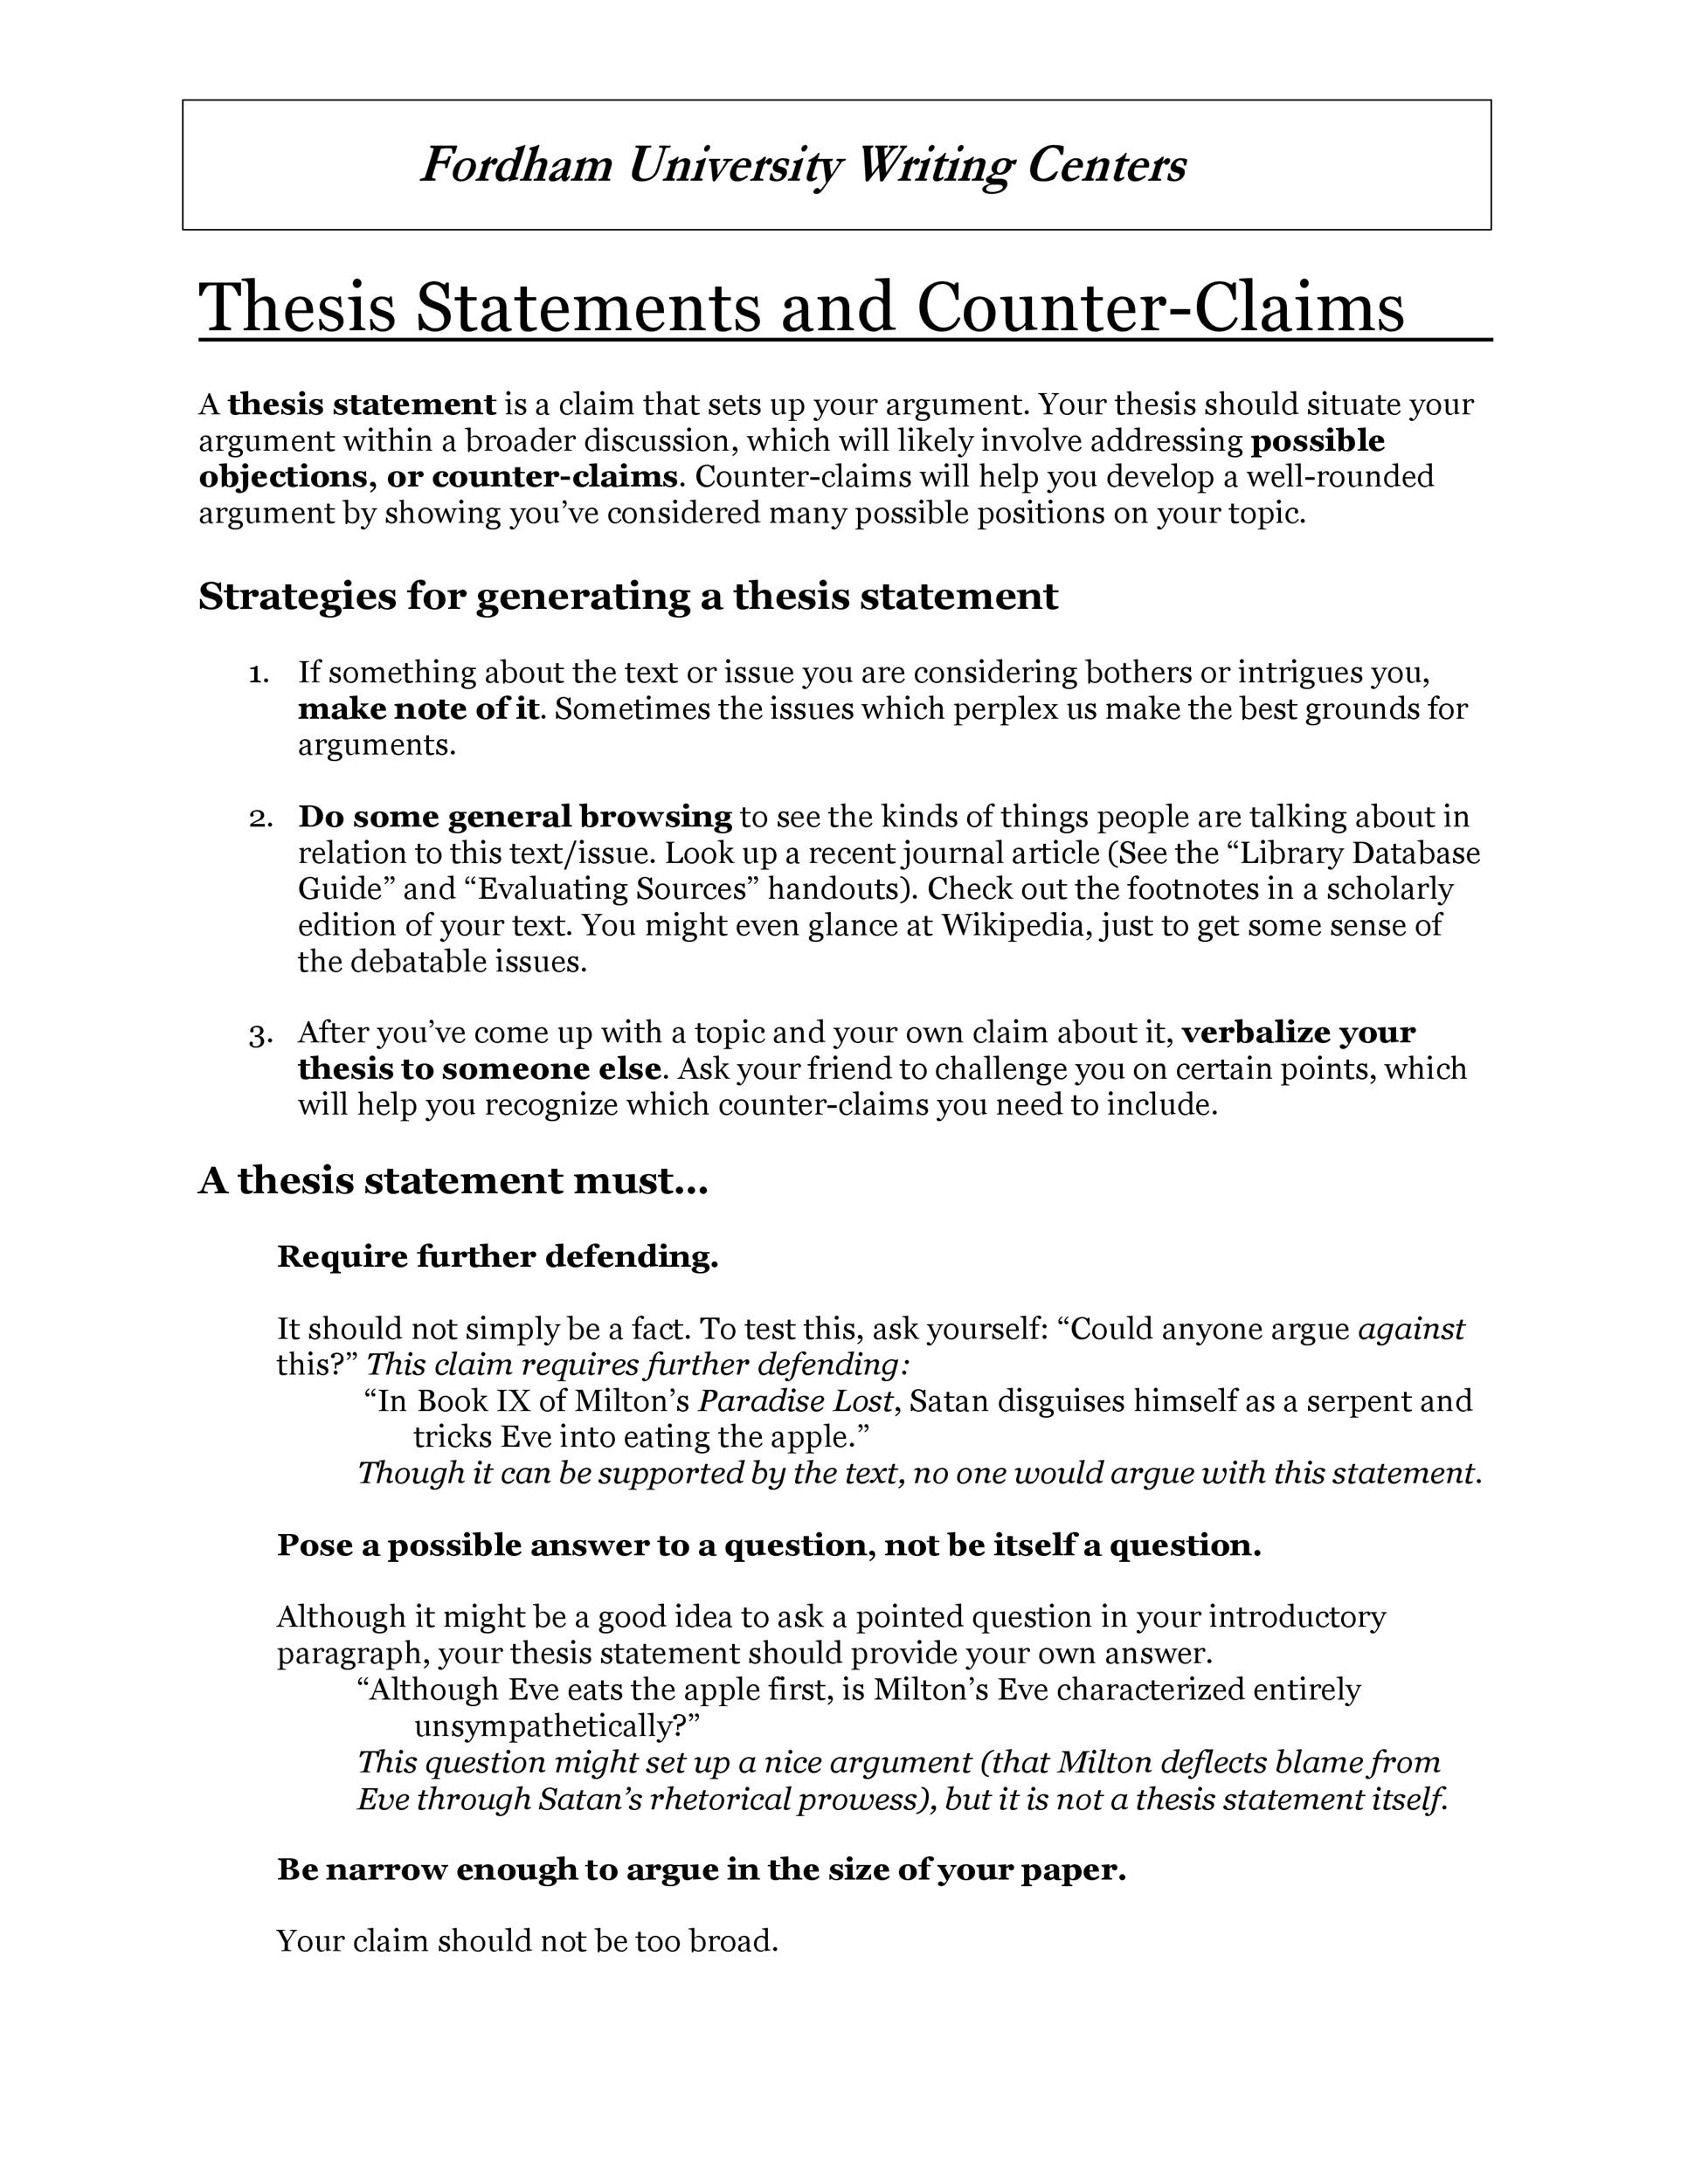 intro and thesis statement examples